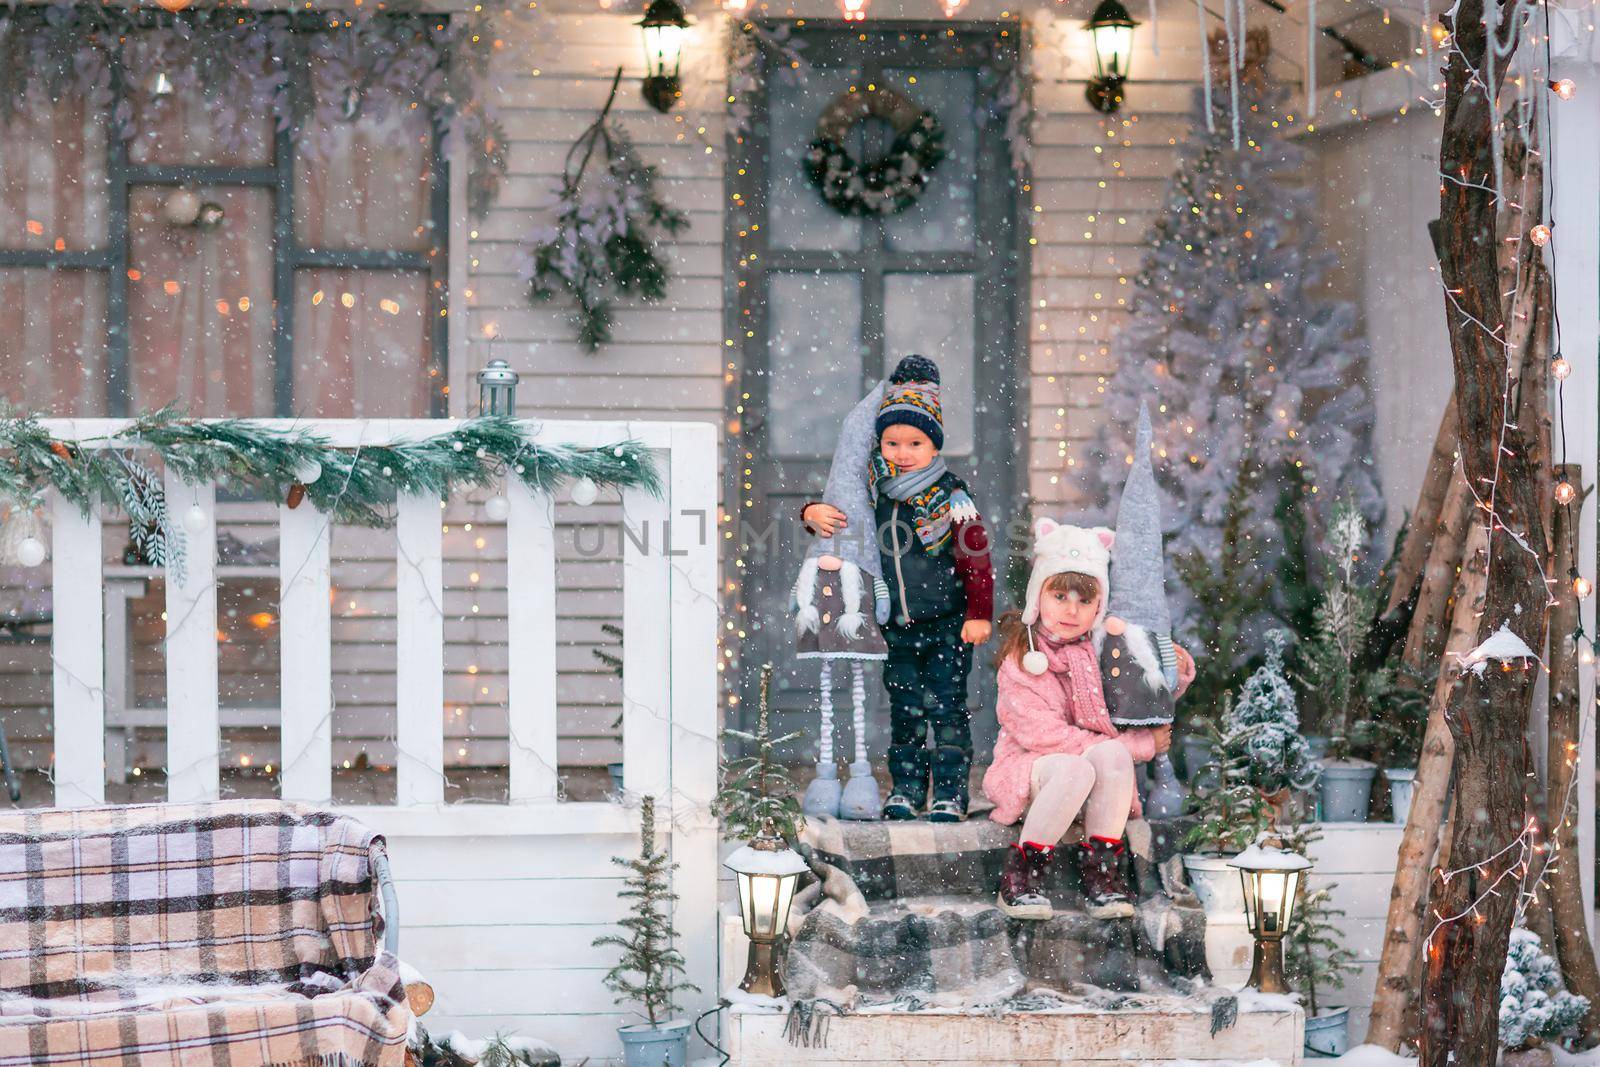 Happy little kids sitting on the porch of the Christmas decorated house outdoor by Len44ik